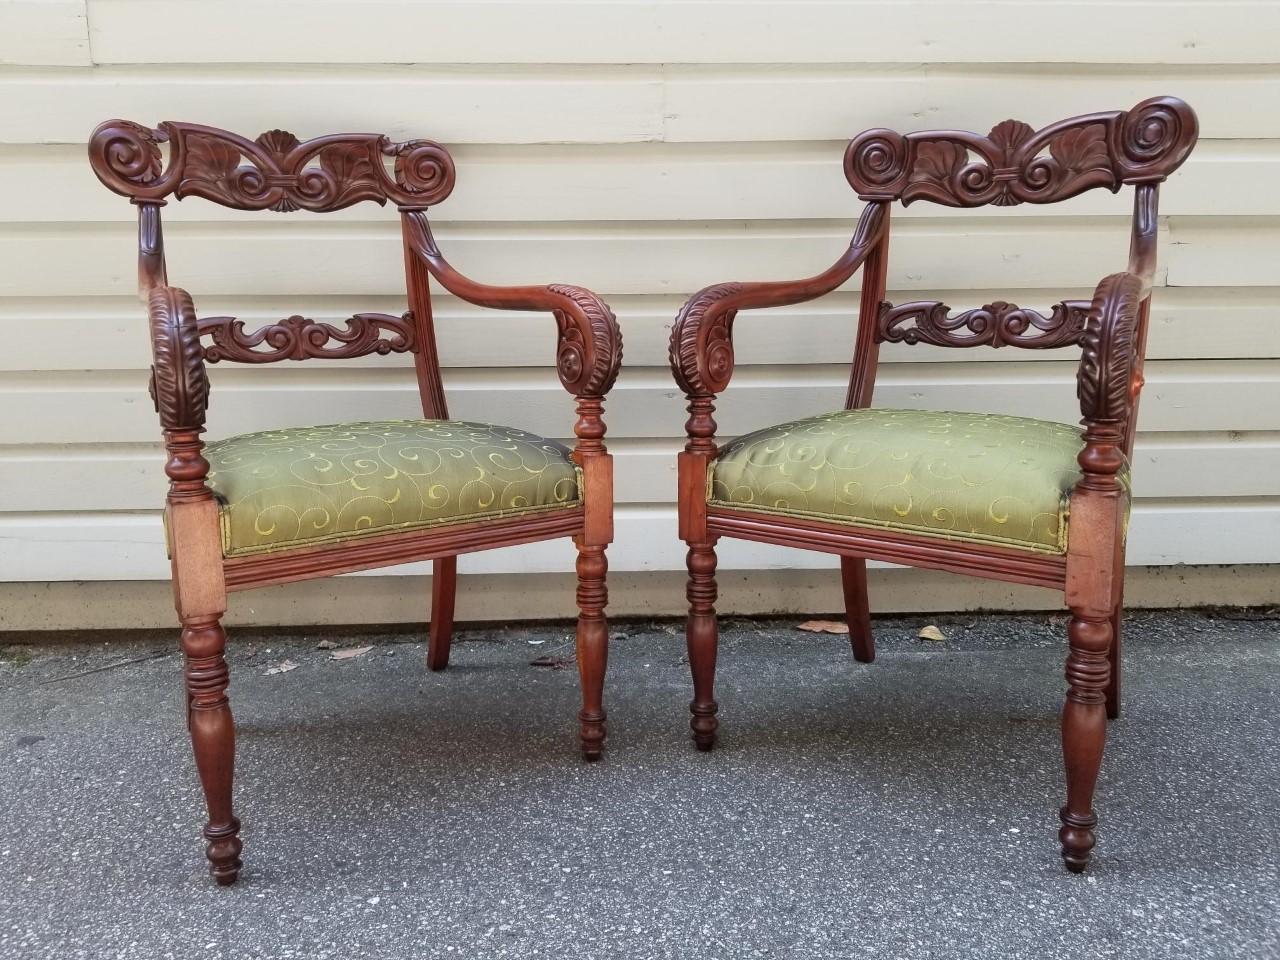 This wonderful pair of early 19th century Caribbean, West Indies Regency chairs are from the Lesser Antilles. They are made of Mahogany, carved with a double Lotus Crest and an elaborately carved back splat. The back splat is connected to the